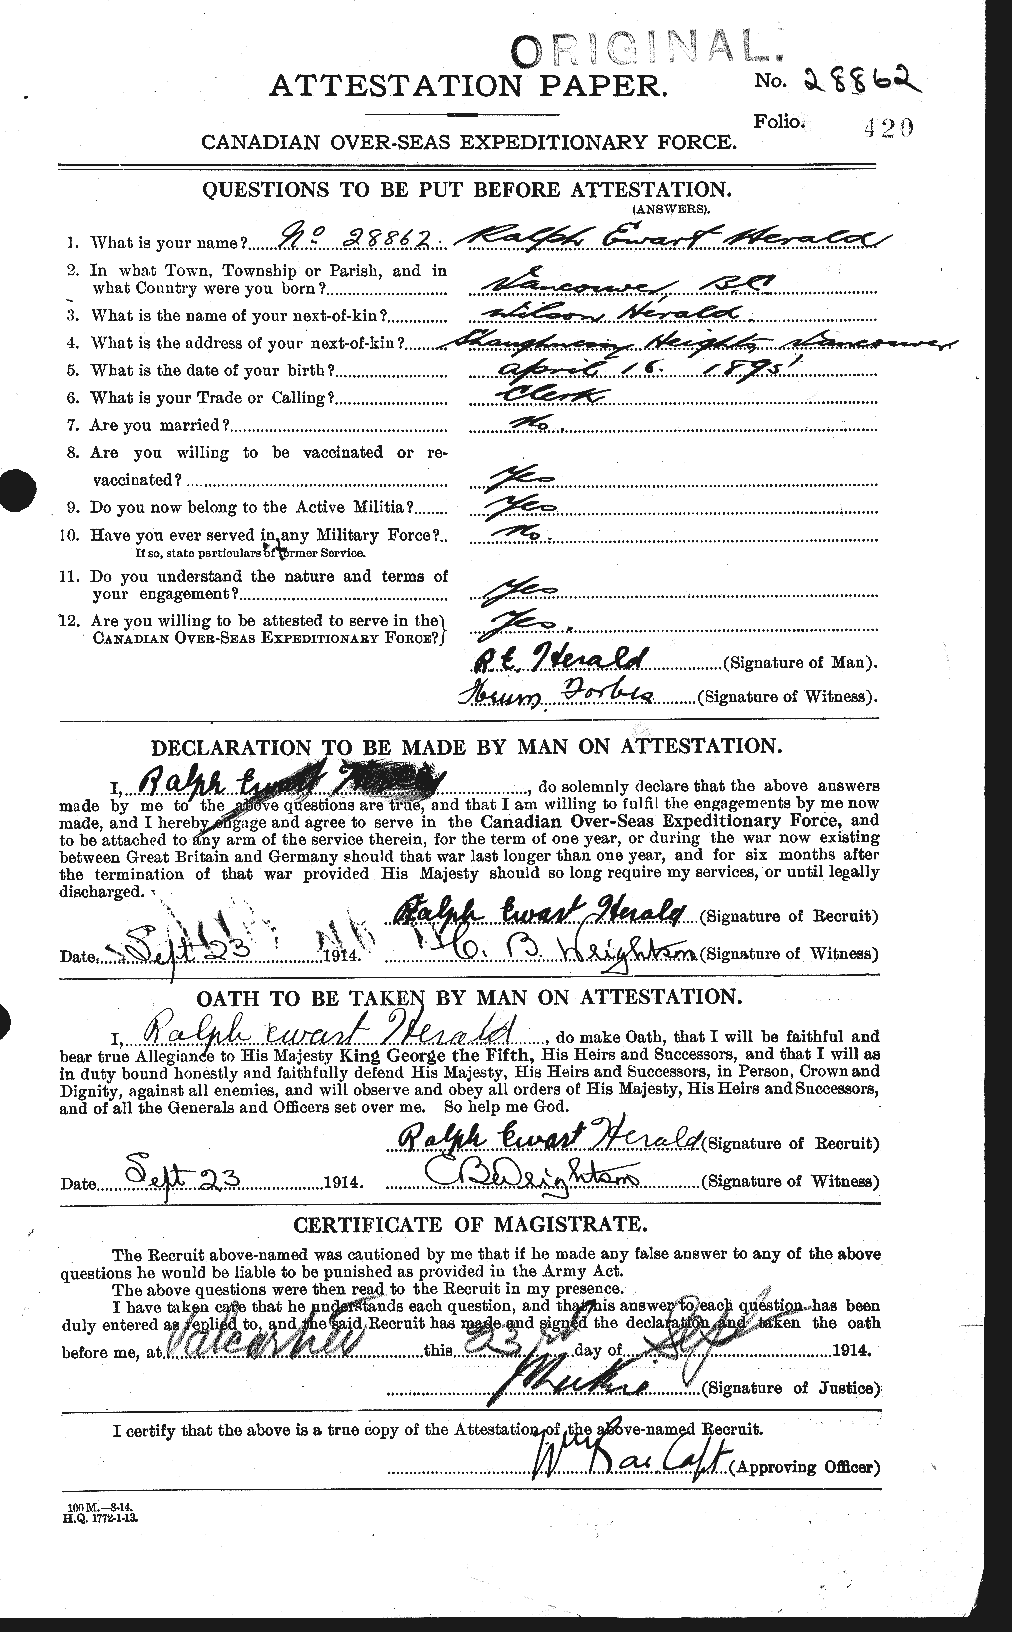 Personnel Records of the First World War - CEF 389903a